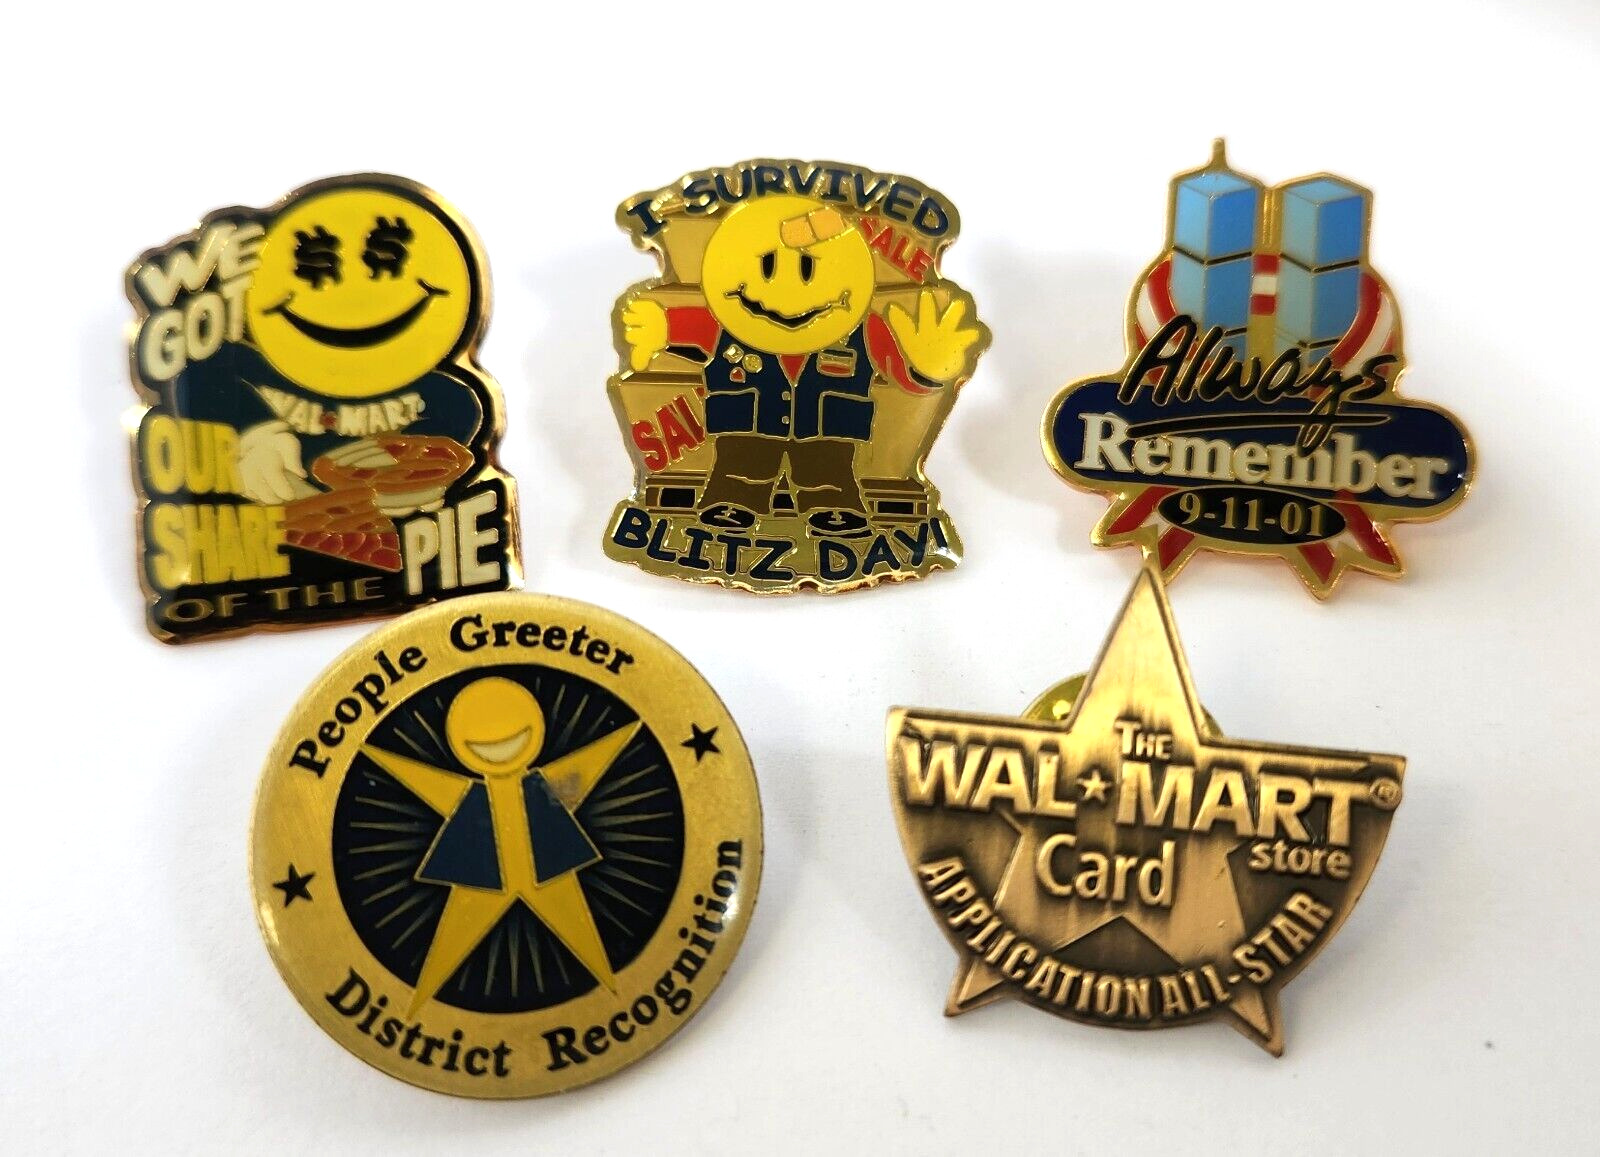 Walmart Pin 5 Lot Remember 9-11 Blitz Day Greeter Our Share Application Card